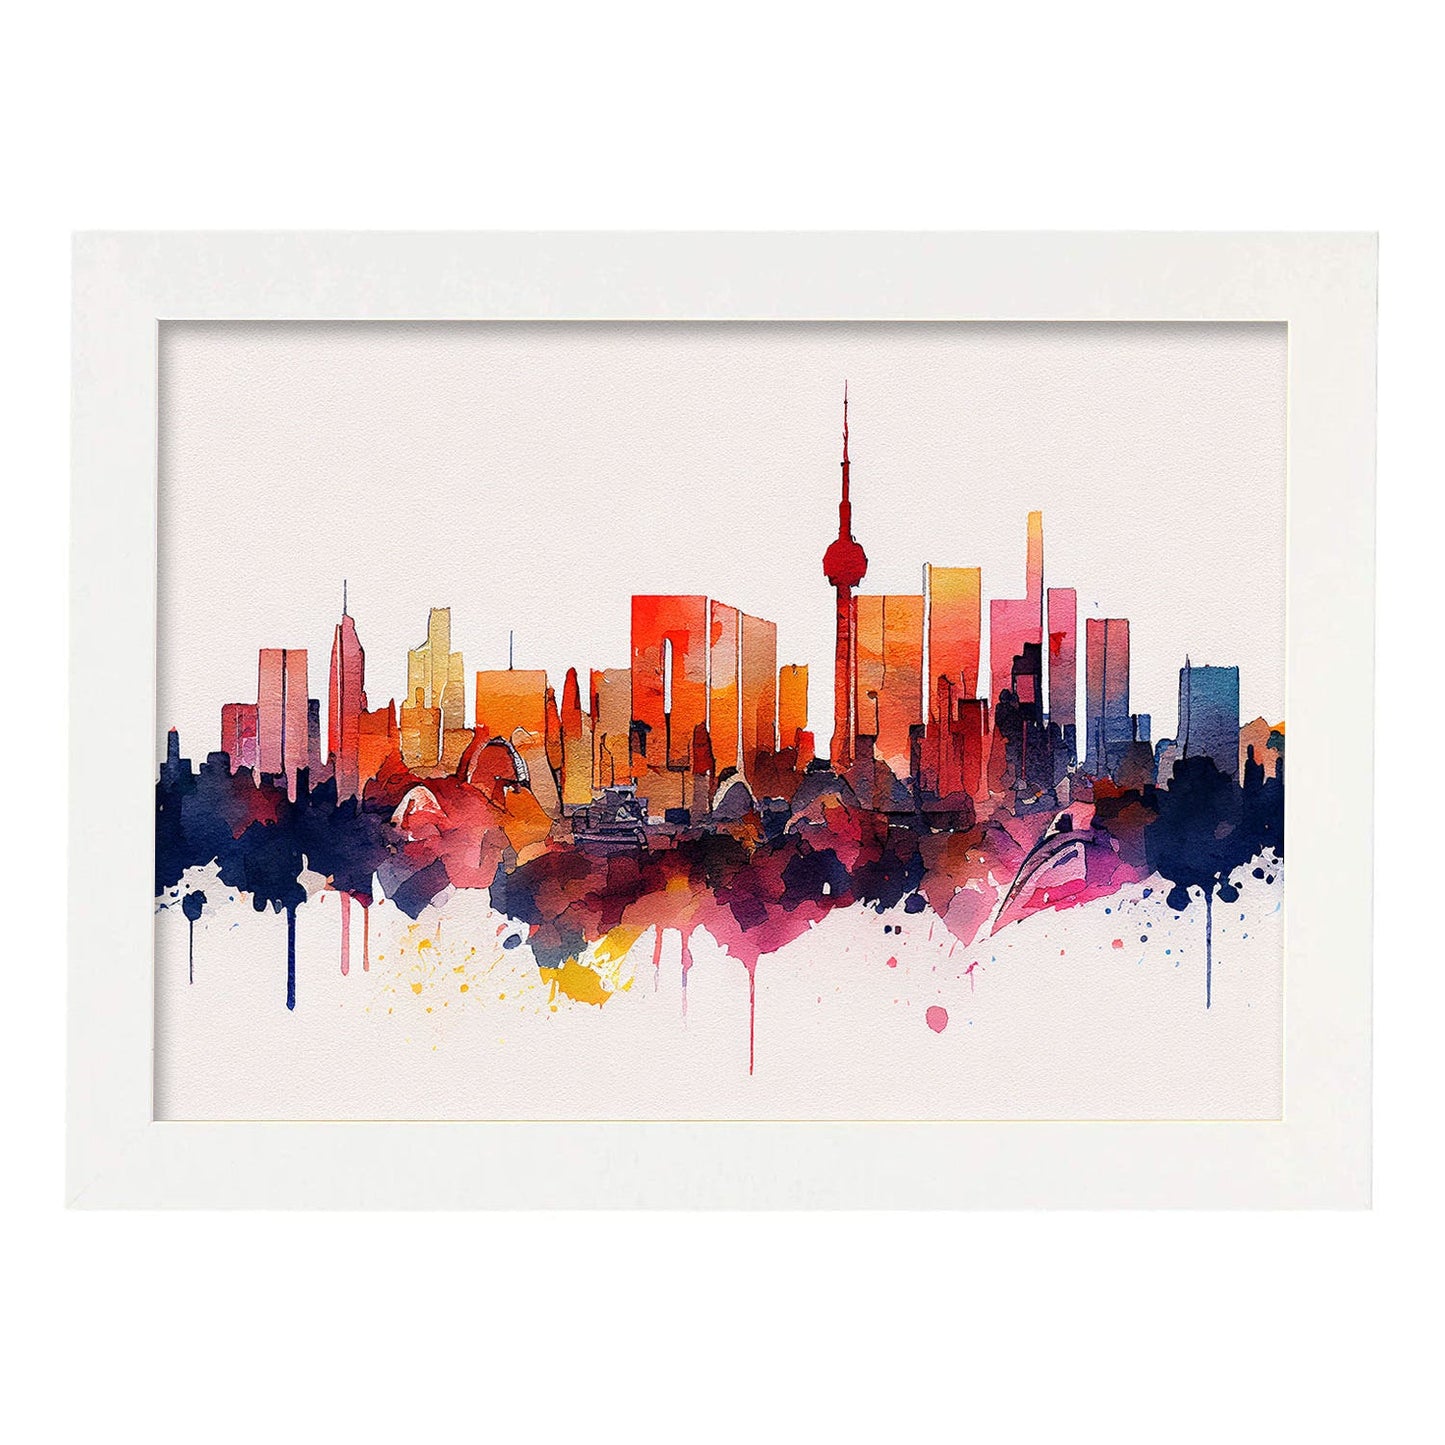 Nacnic watercolor of a skyline of the city of Tokyo_2. Aesthetic Wall Art Prints for Bedroom or Living Room Design.-Artwork-Nacnic-A4-Marco Blanco-Nacnic Estudio SL